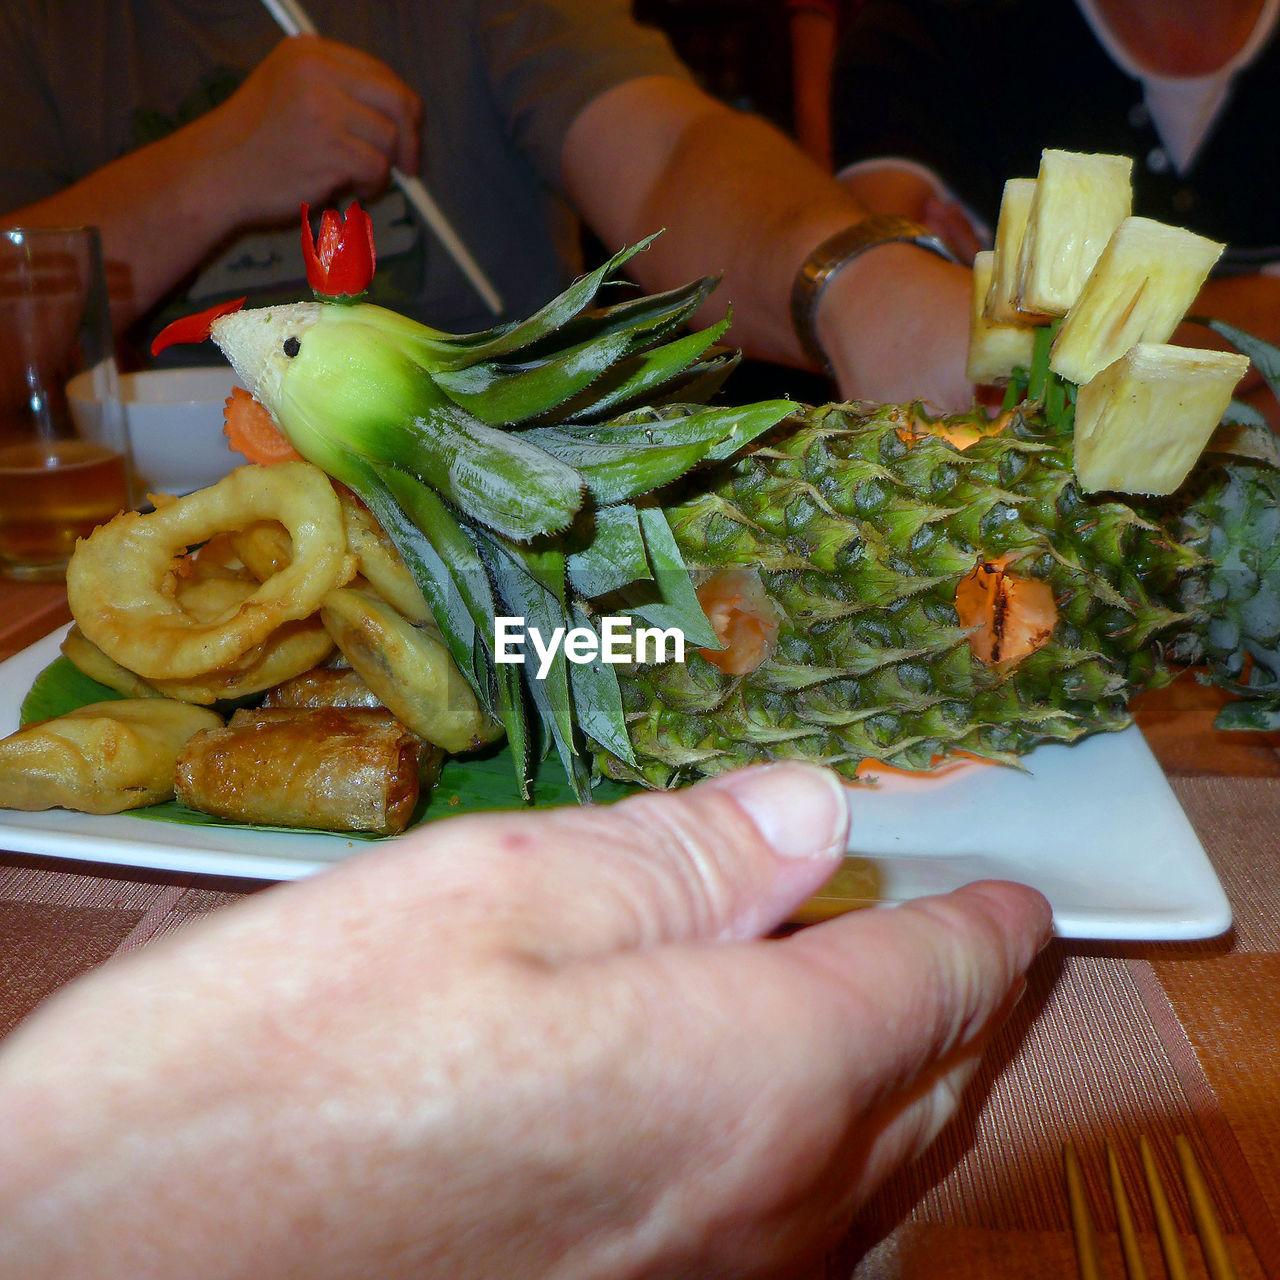 CROPPED IMAGE OF HAND HOLDING FOOD